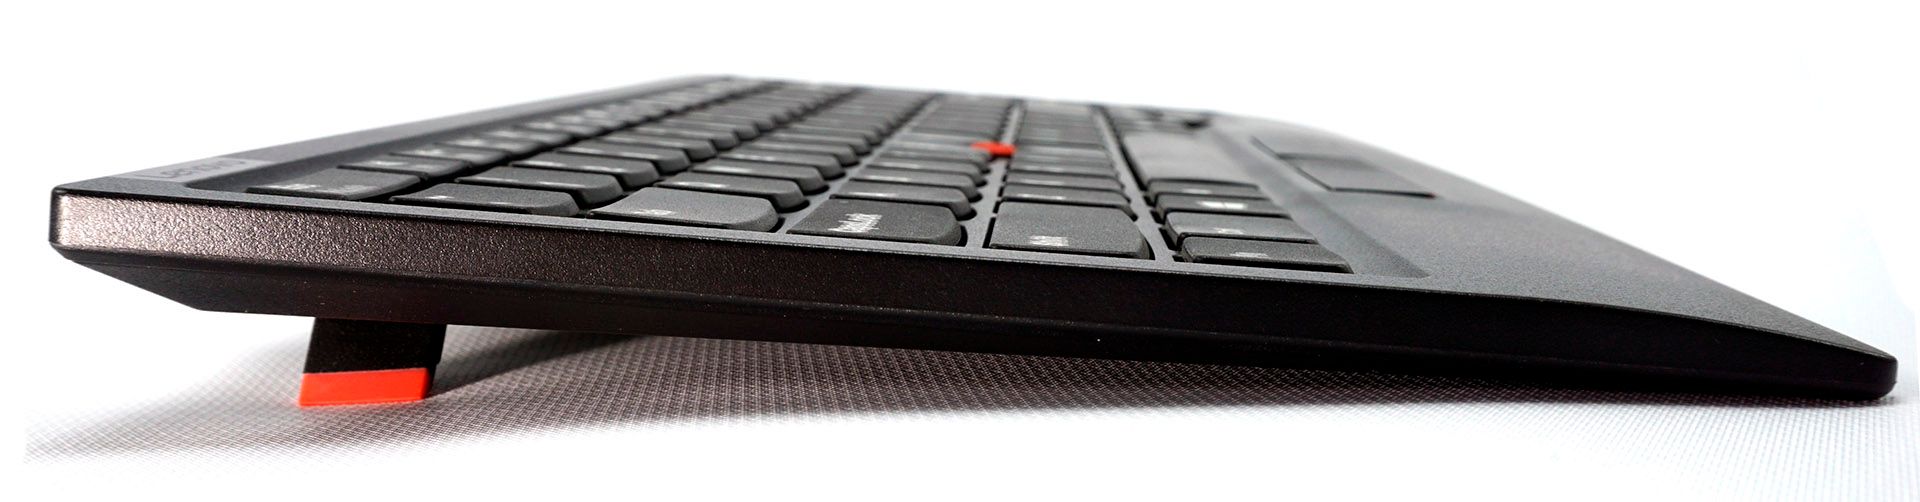 ThinkPad keyboard from the left side 